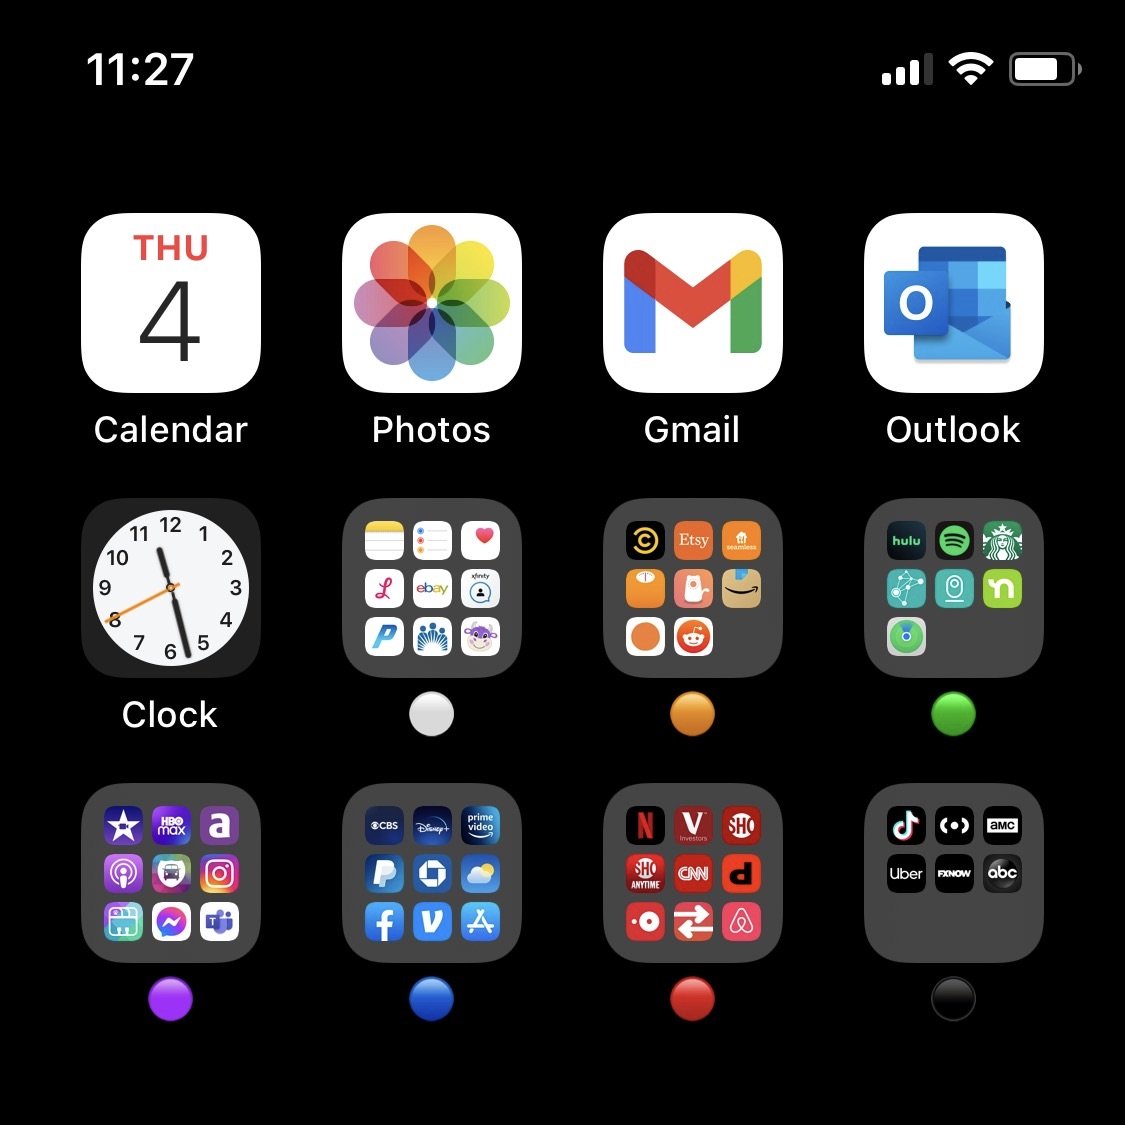 My sister's iPhone apps, organized by color